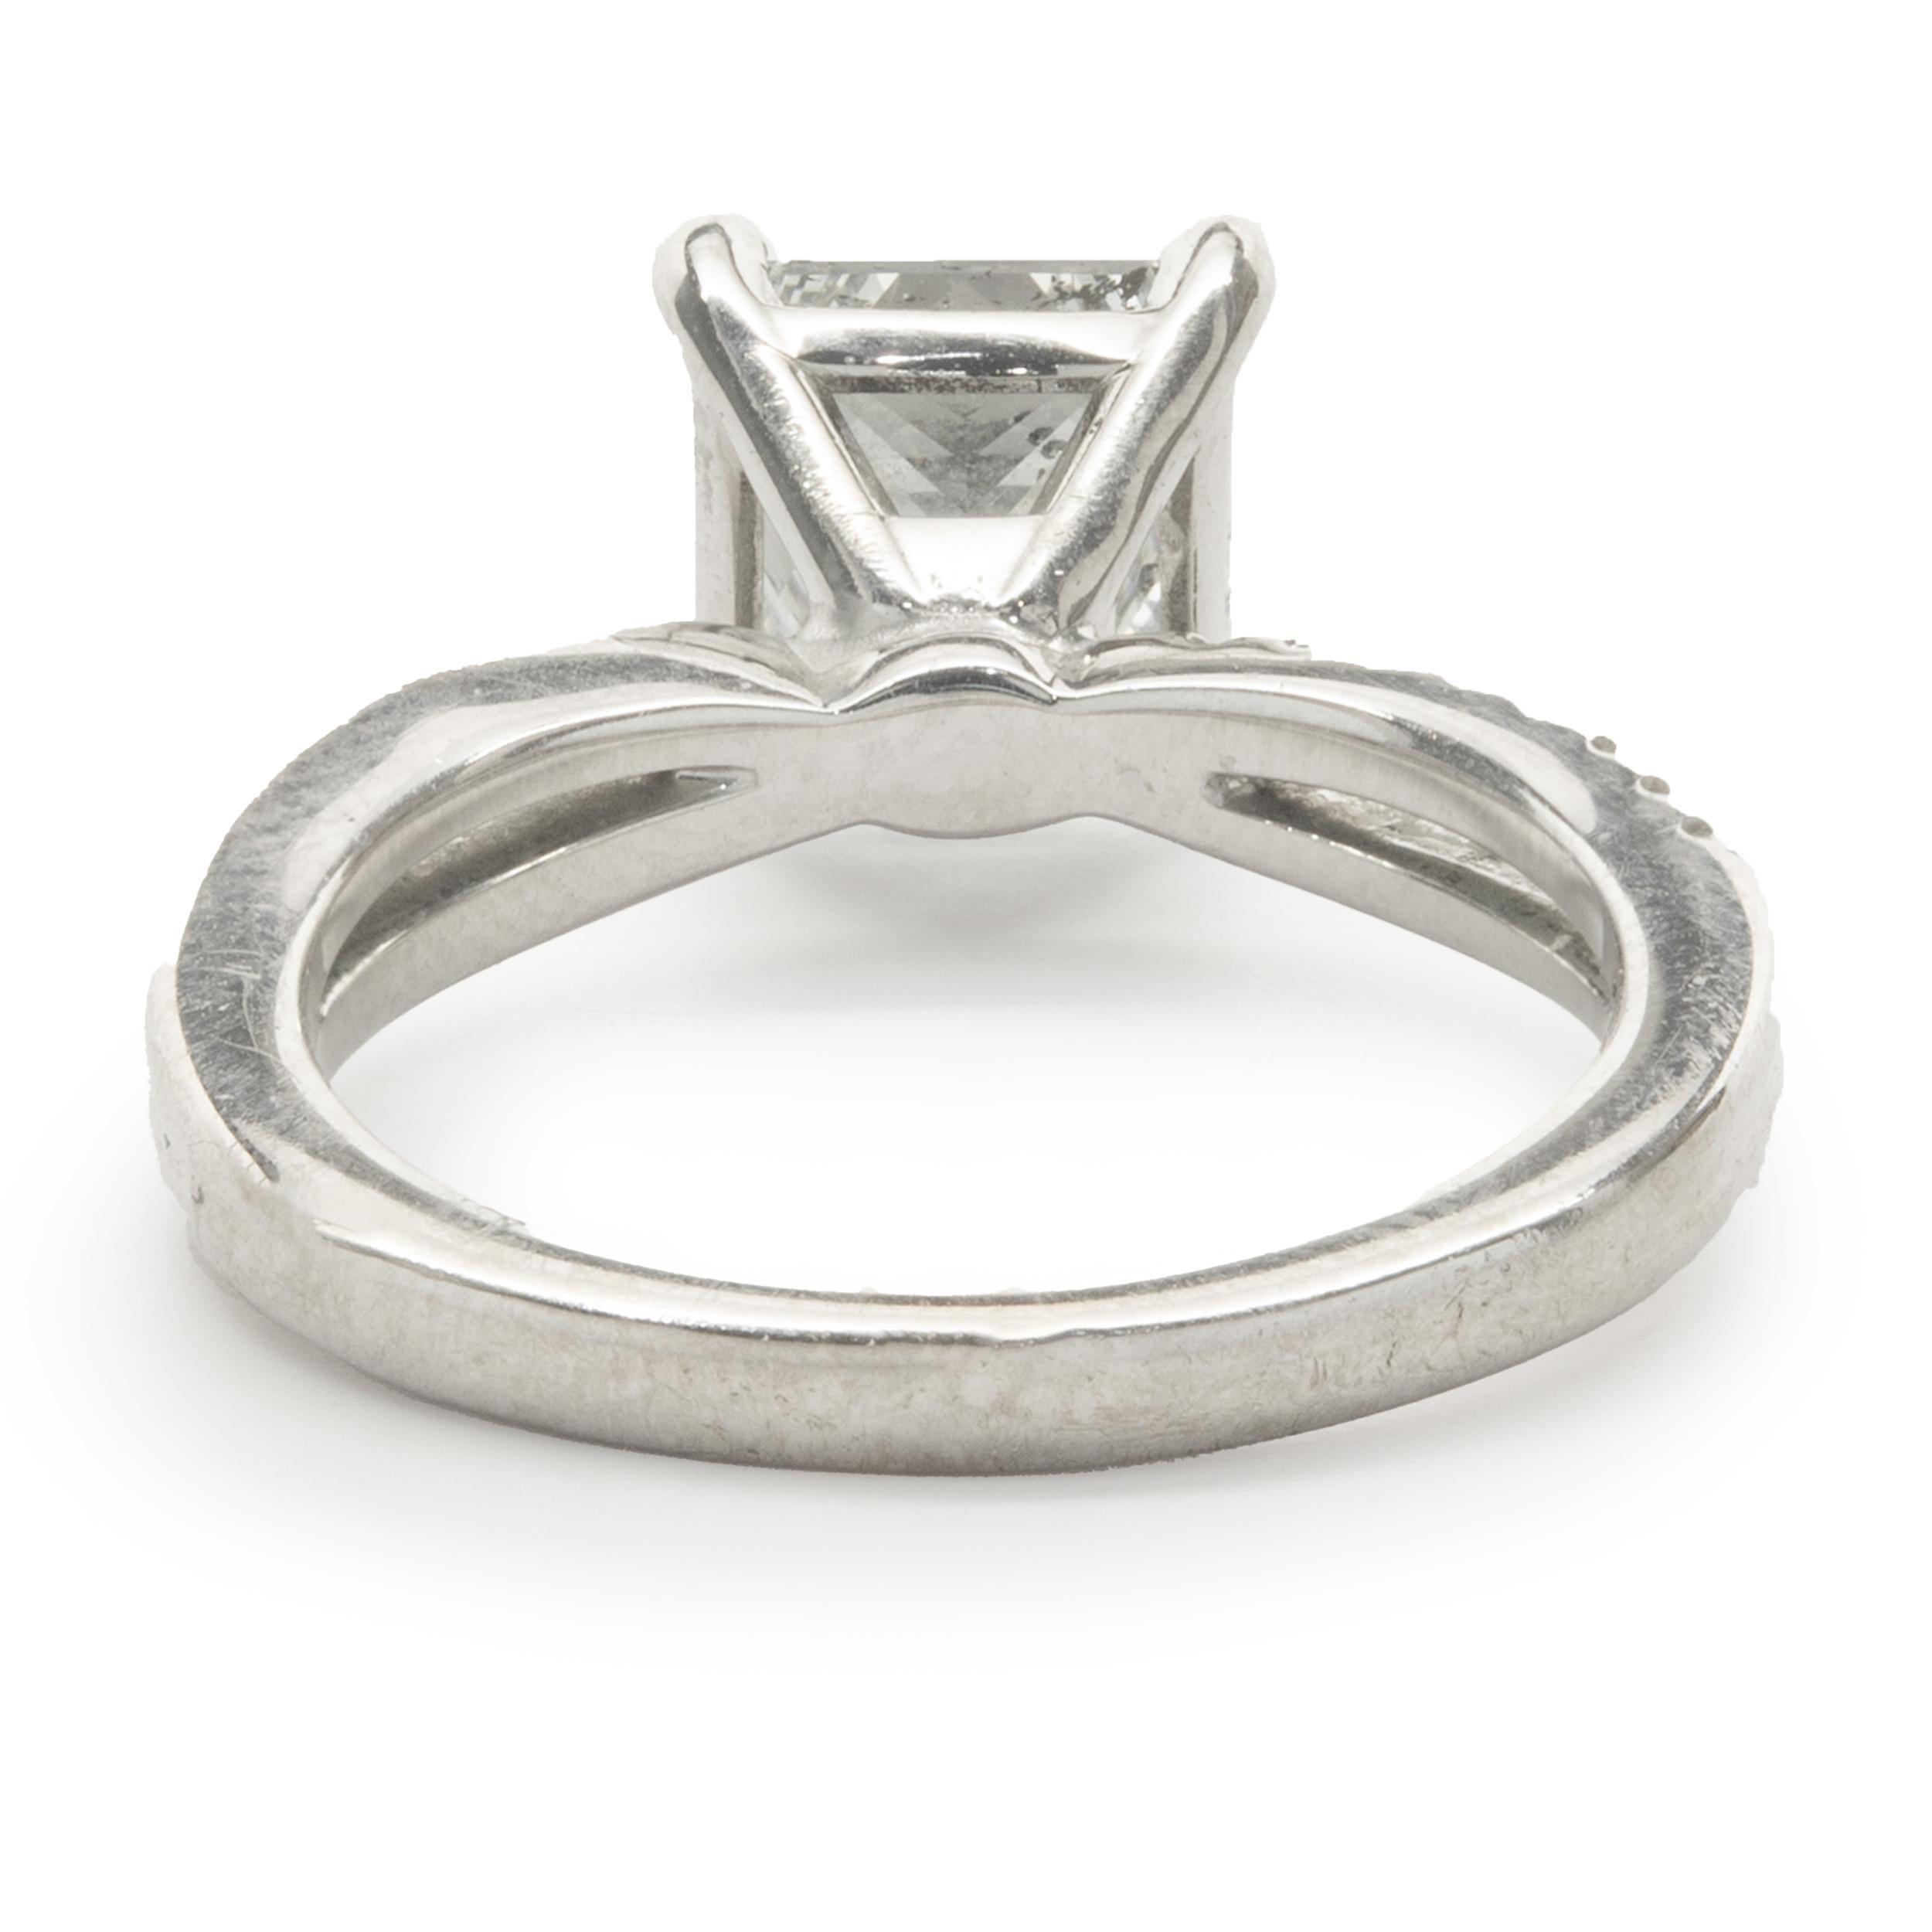 14 Karat White Gold Princess Cut Diamond Engagement Ring In Excellent Condition For Sale In Scottsdale, AZ